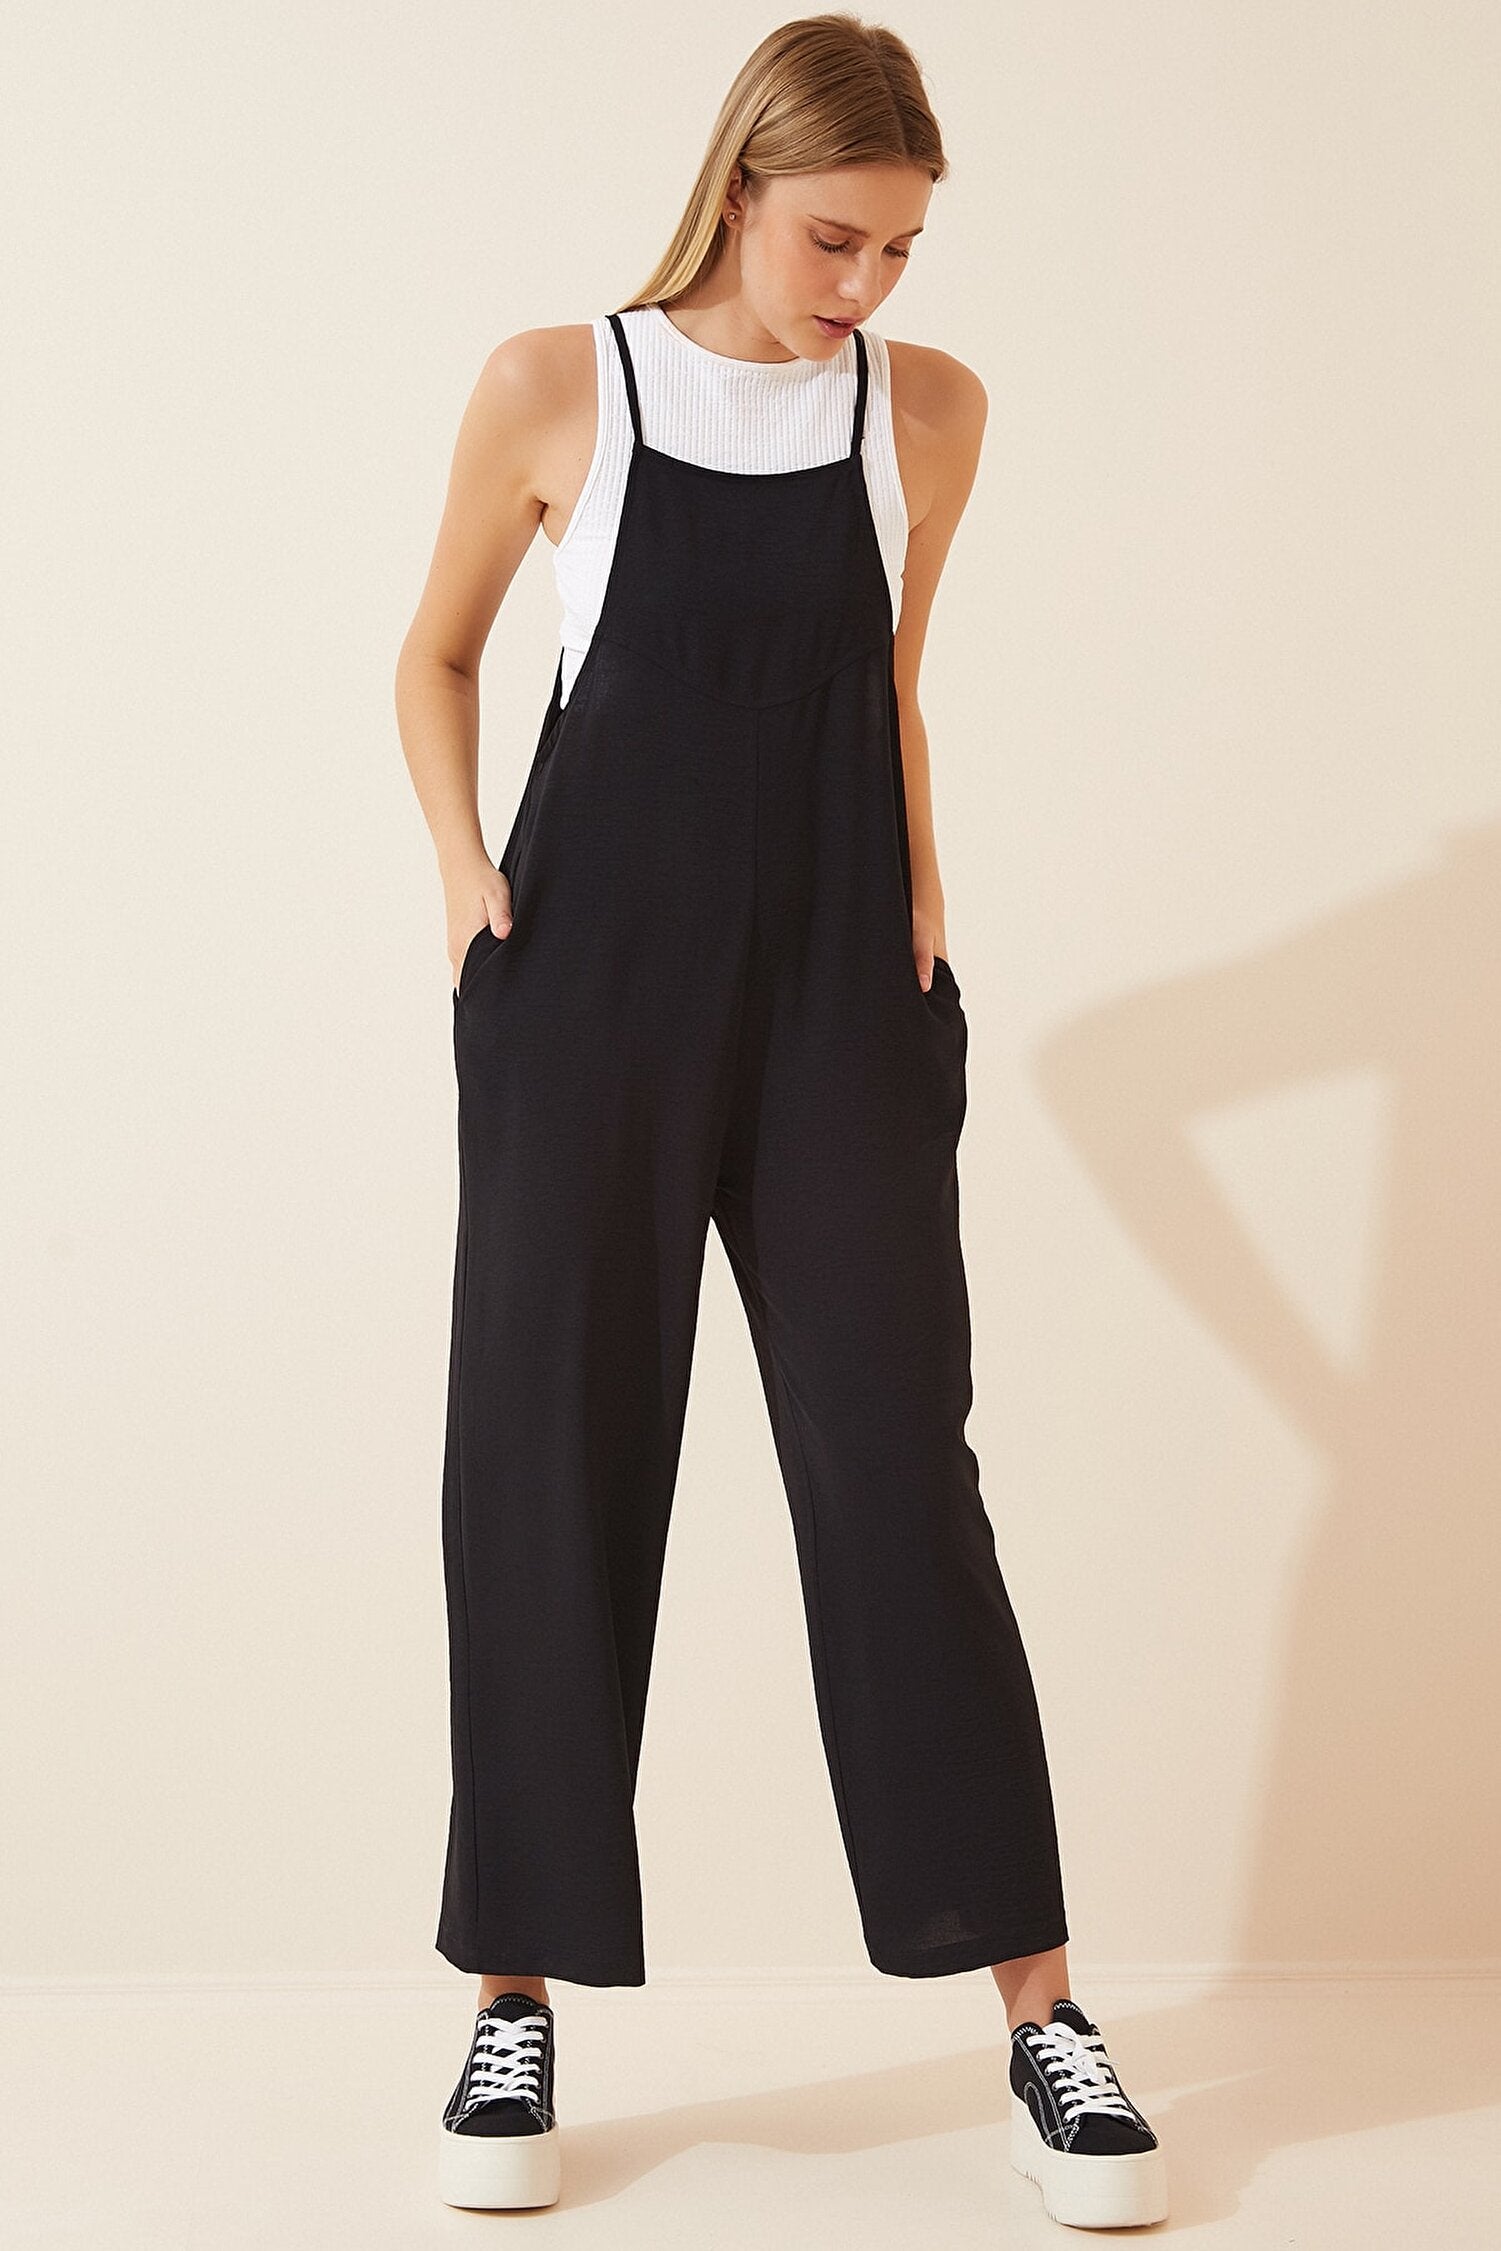 Women's Casual Overalls Jumpsuits